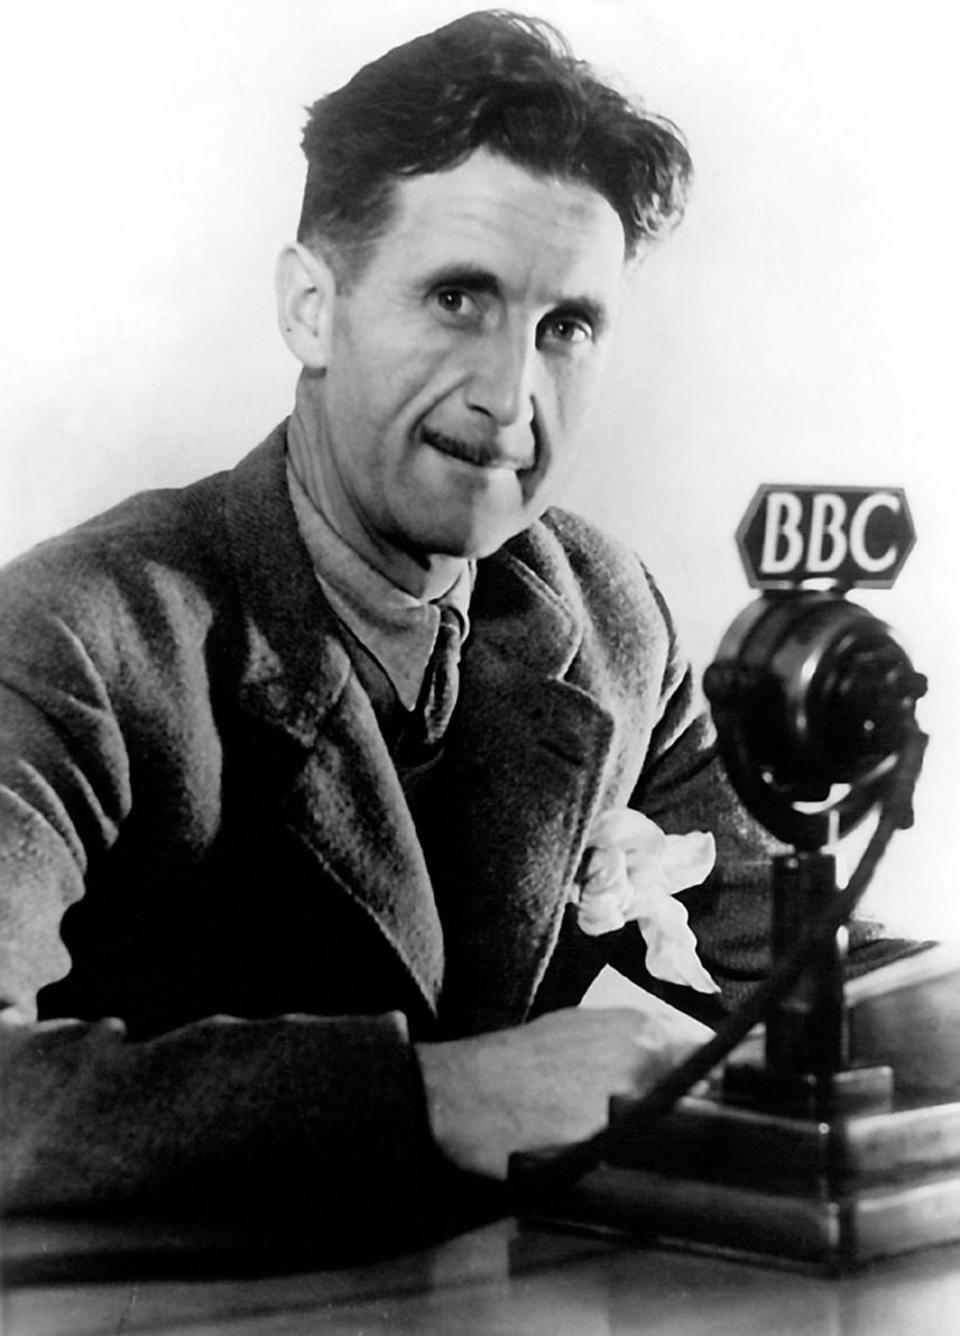 George Orwell, pictured in 1941, is one of those rare writers whose name has turned into a widely used adjective